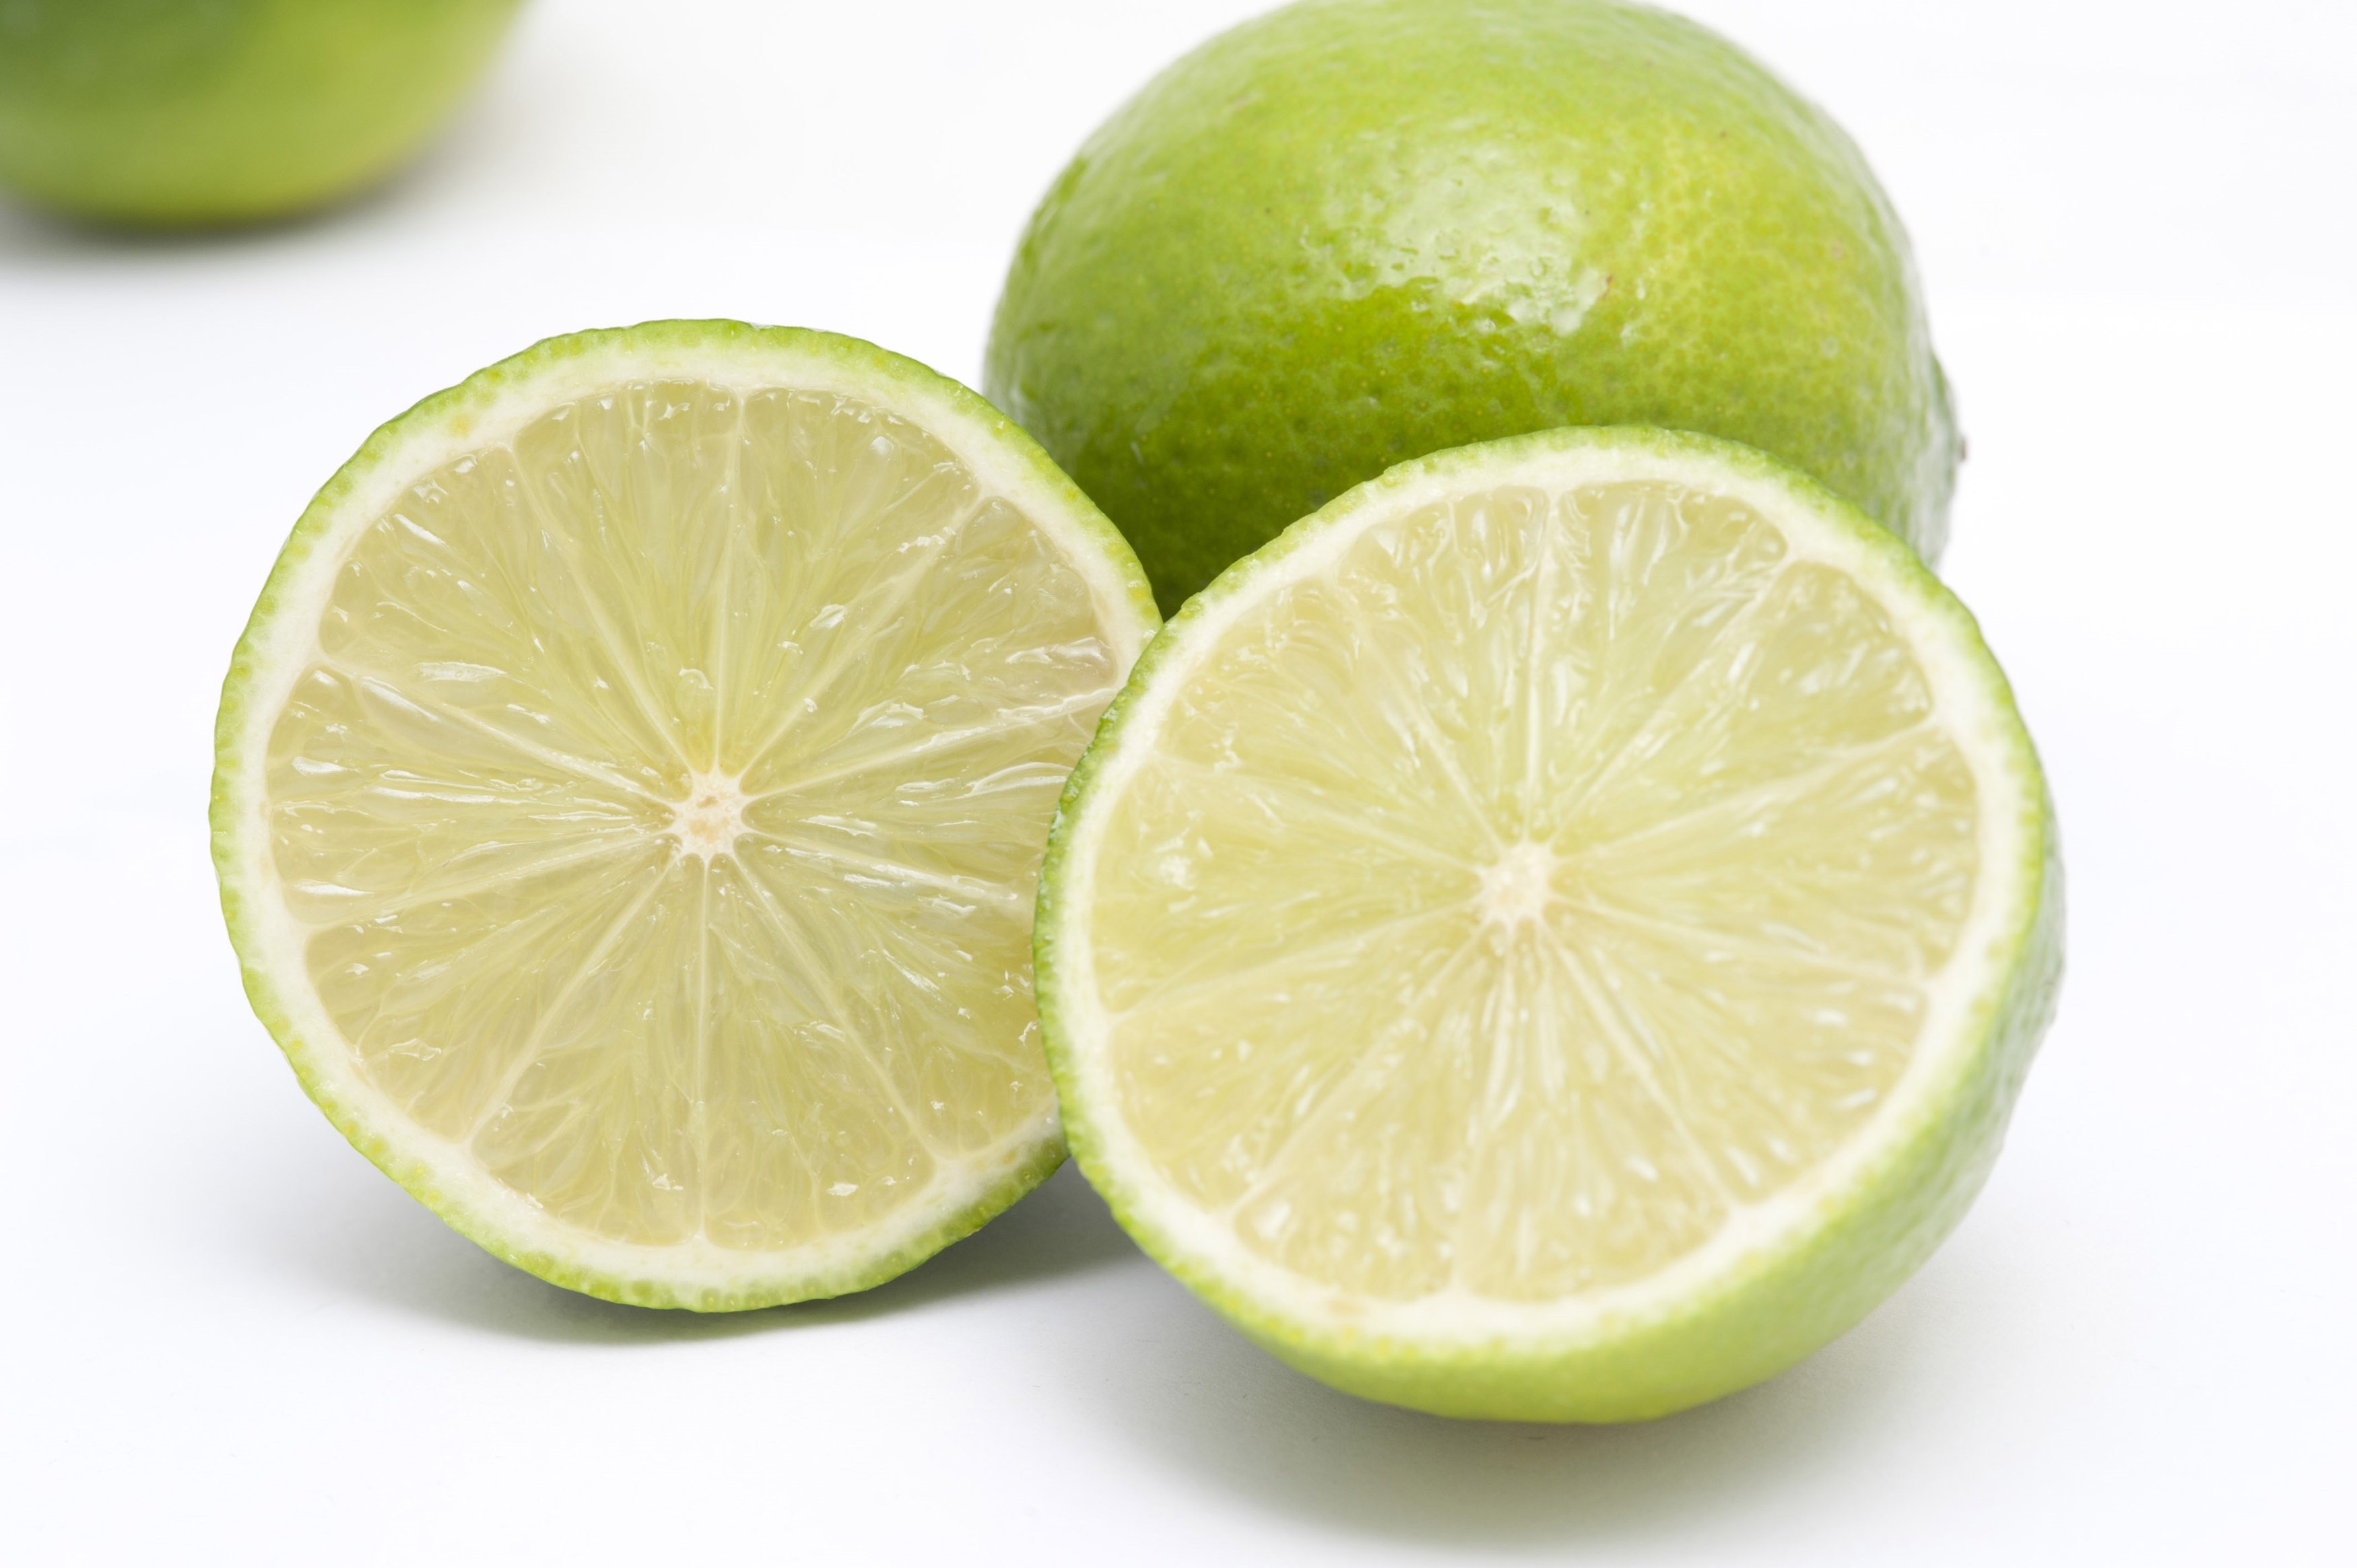 Halved lime - Free Stock Image